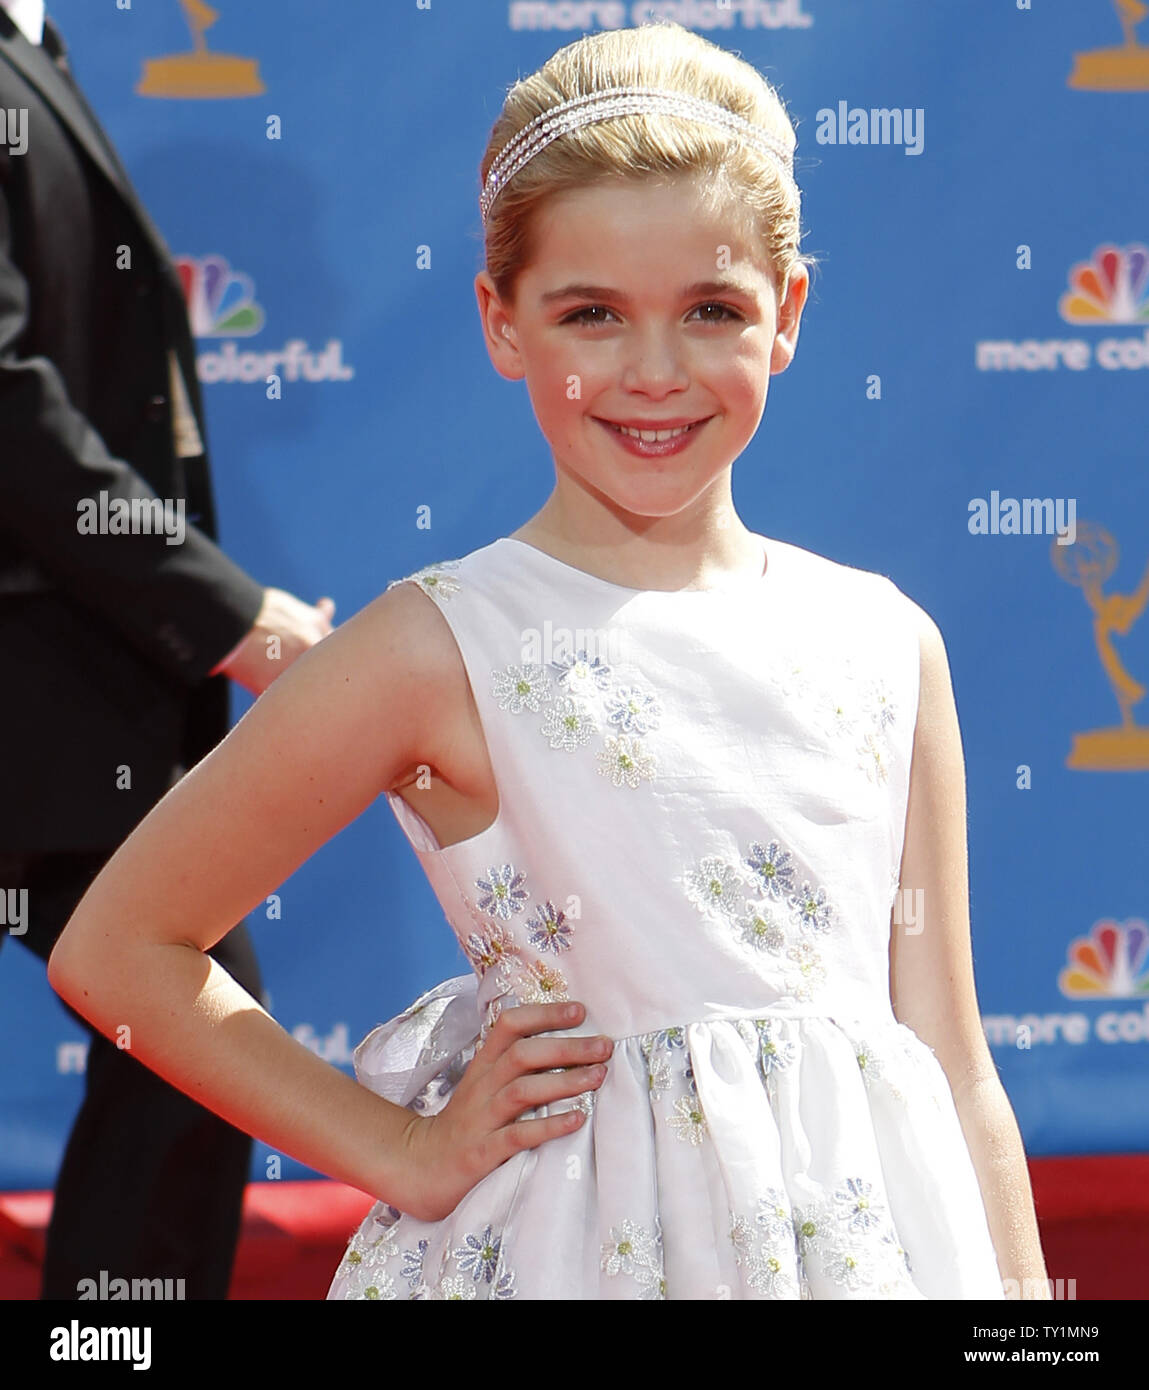 Kiernan Shipka from 'Mad Men' arrives at the 62nd Primetime Emmy Awards at the Nokia Theatre in Los Angeles on August 29, 2010.    UPI/Lori Shepler Stock Photo